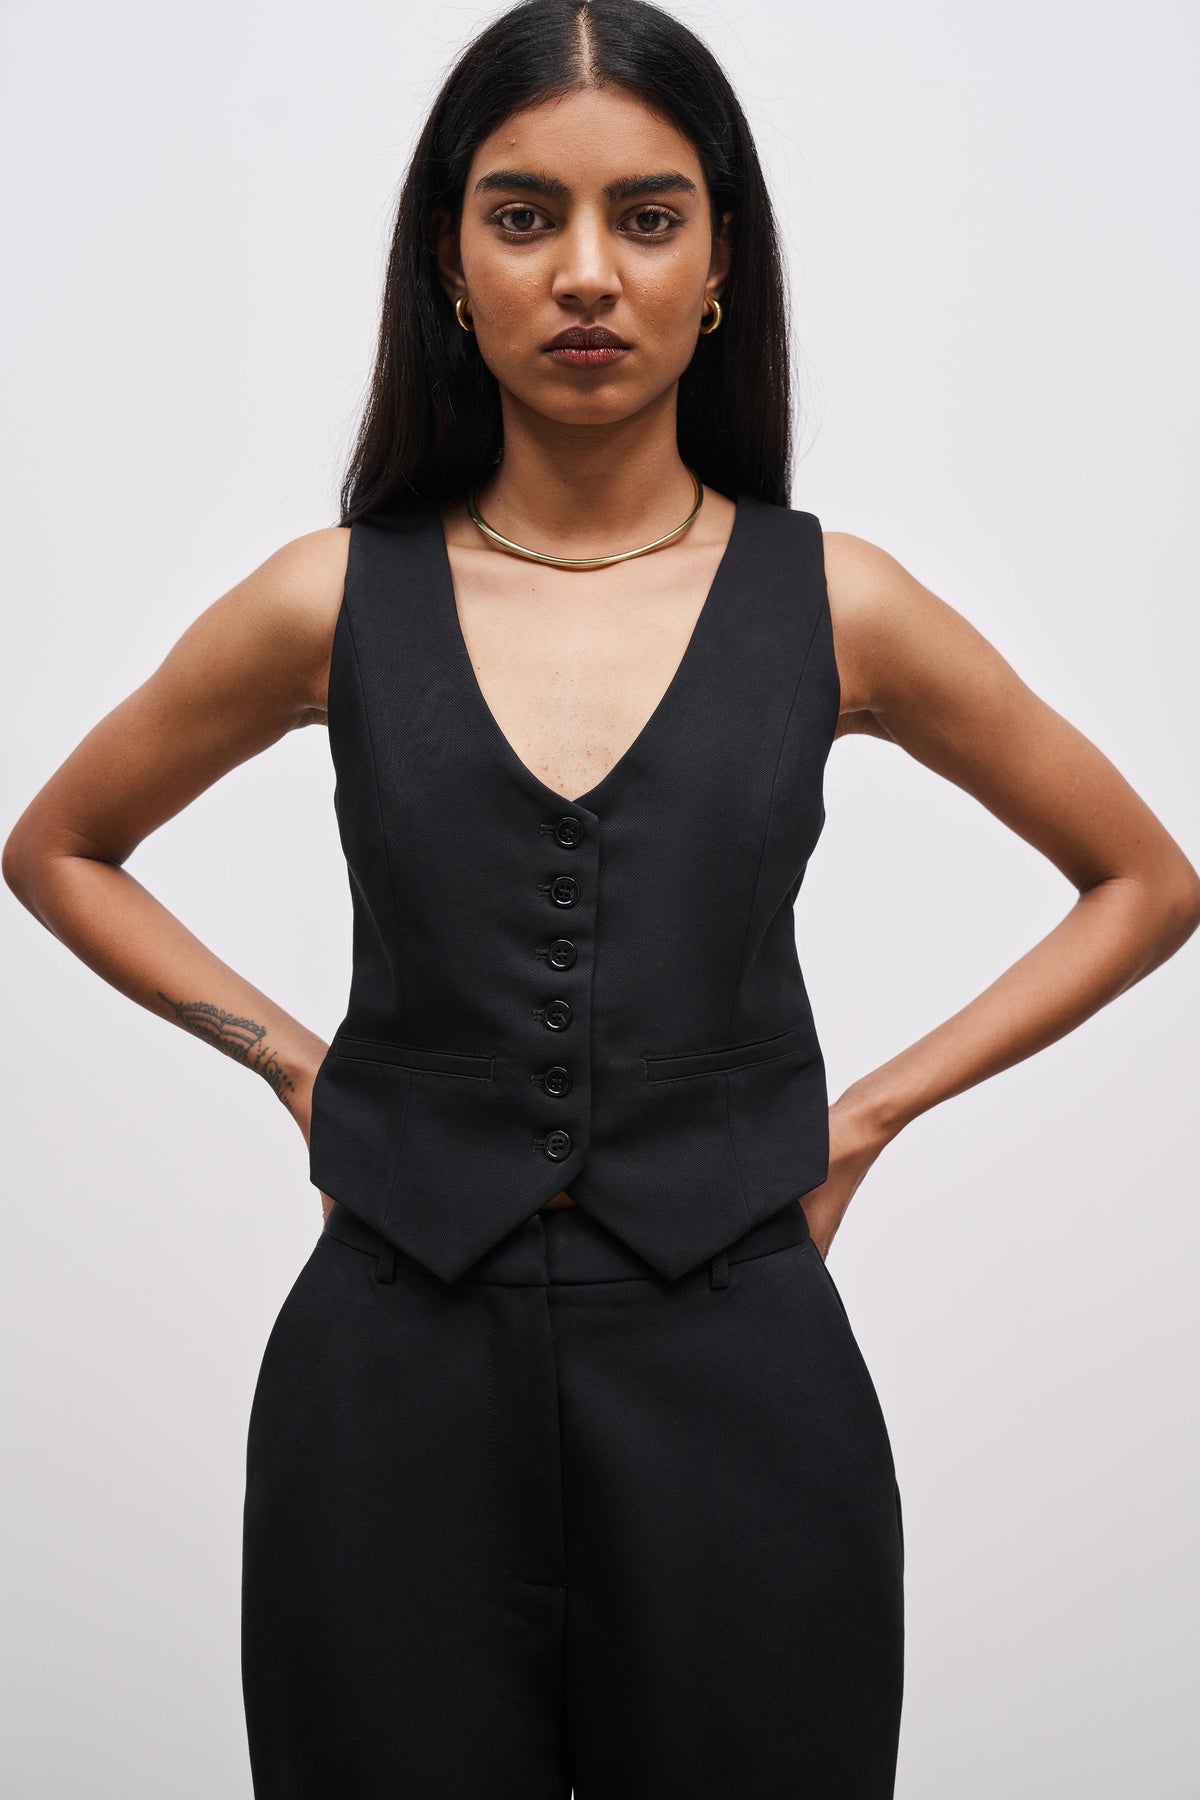 Formal Fitted Waistcoat - Black